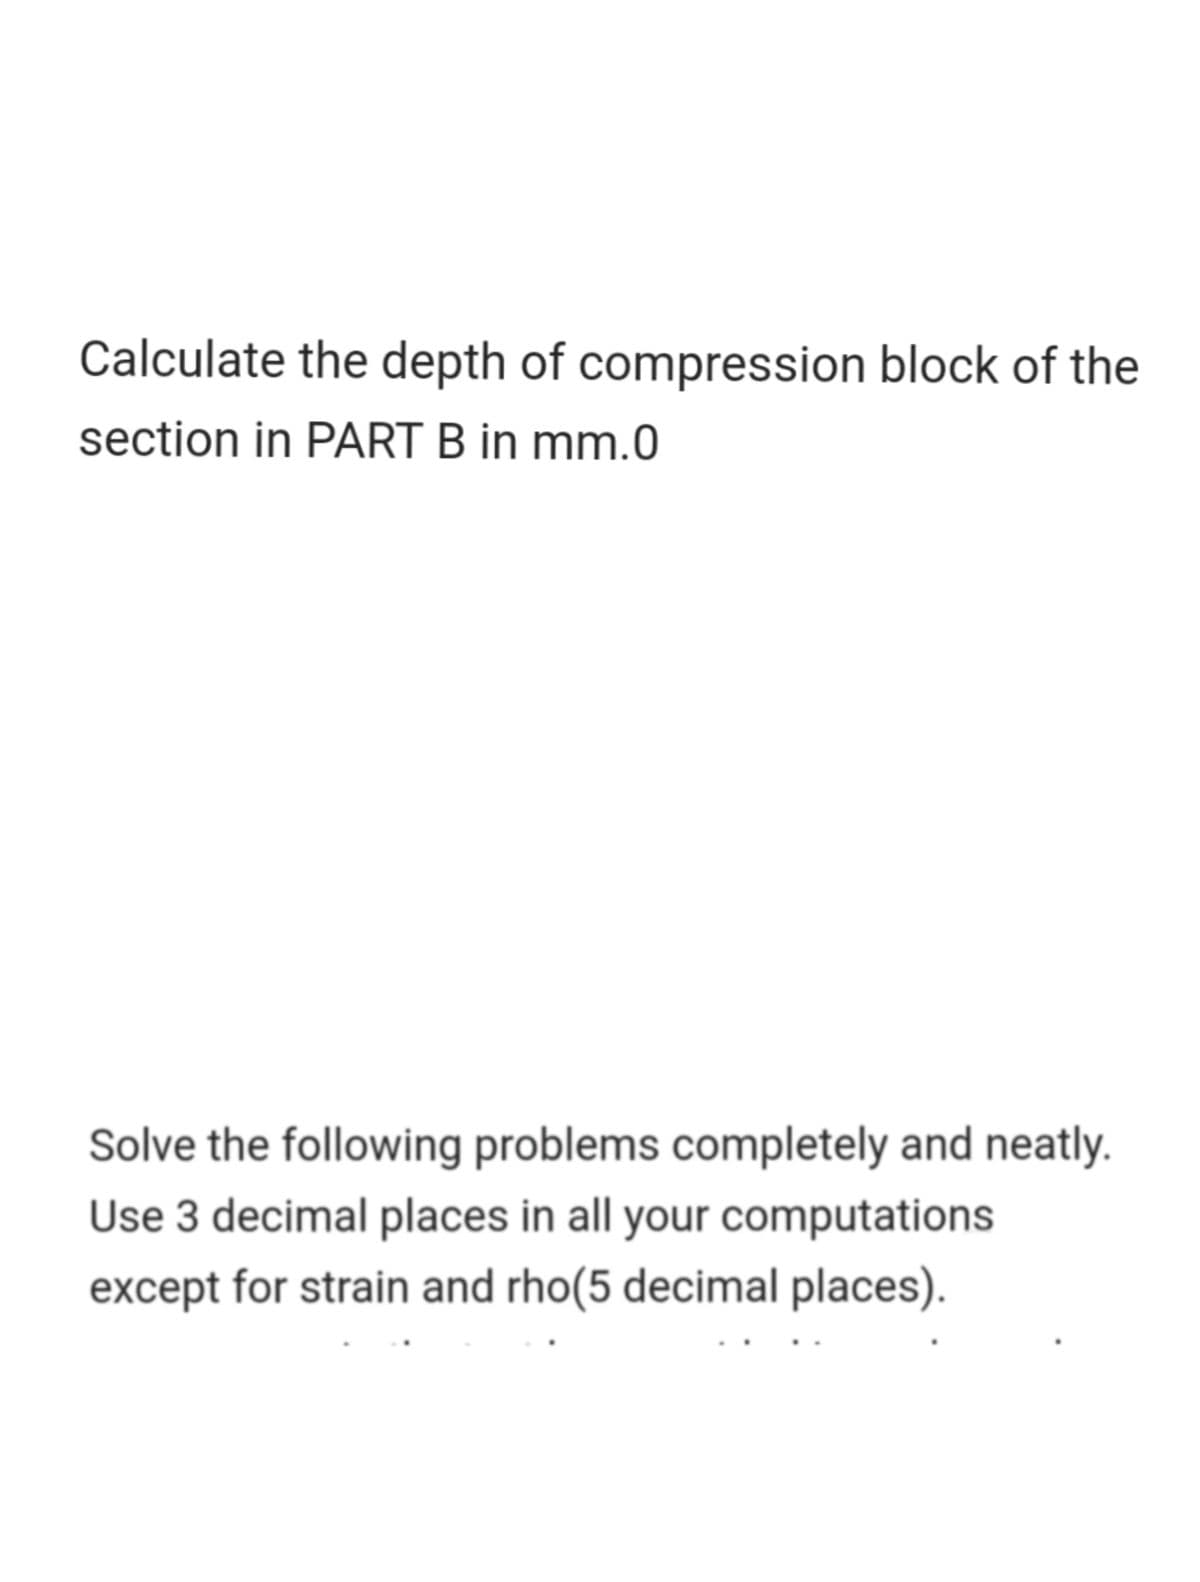 Calculate the depth of compression block of the
section in PART B in mm.0
Solve the following problems completely and neatly.
Use 3 decimal places in all your computations
except for strain and rho(5 decimal places).